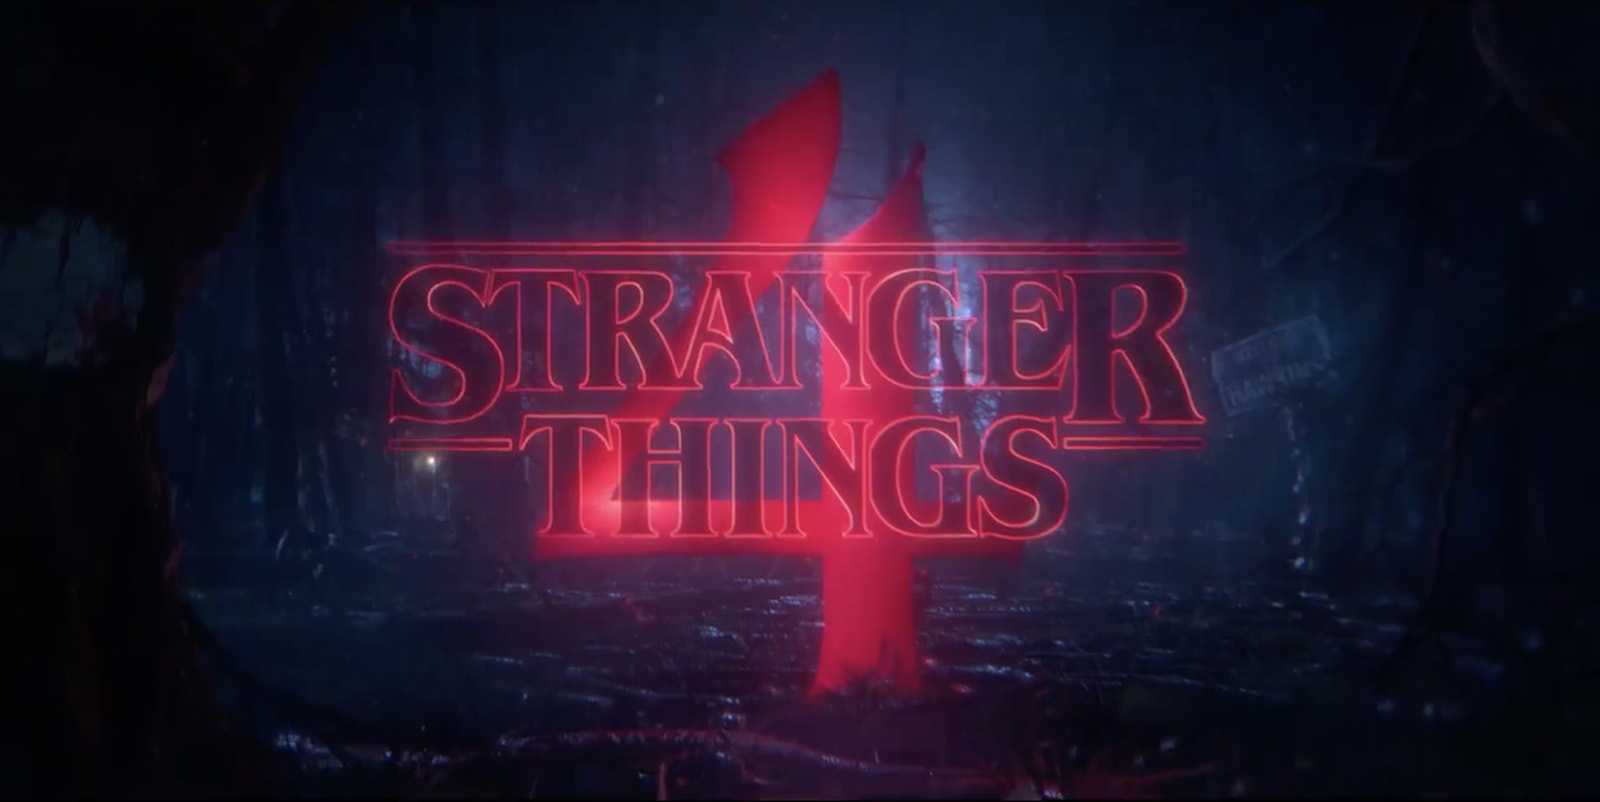 Title of "Stranger Things 4" in black letters with red outlines. Background is a burned forest at night.